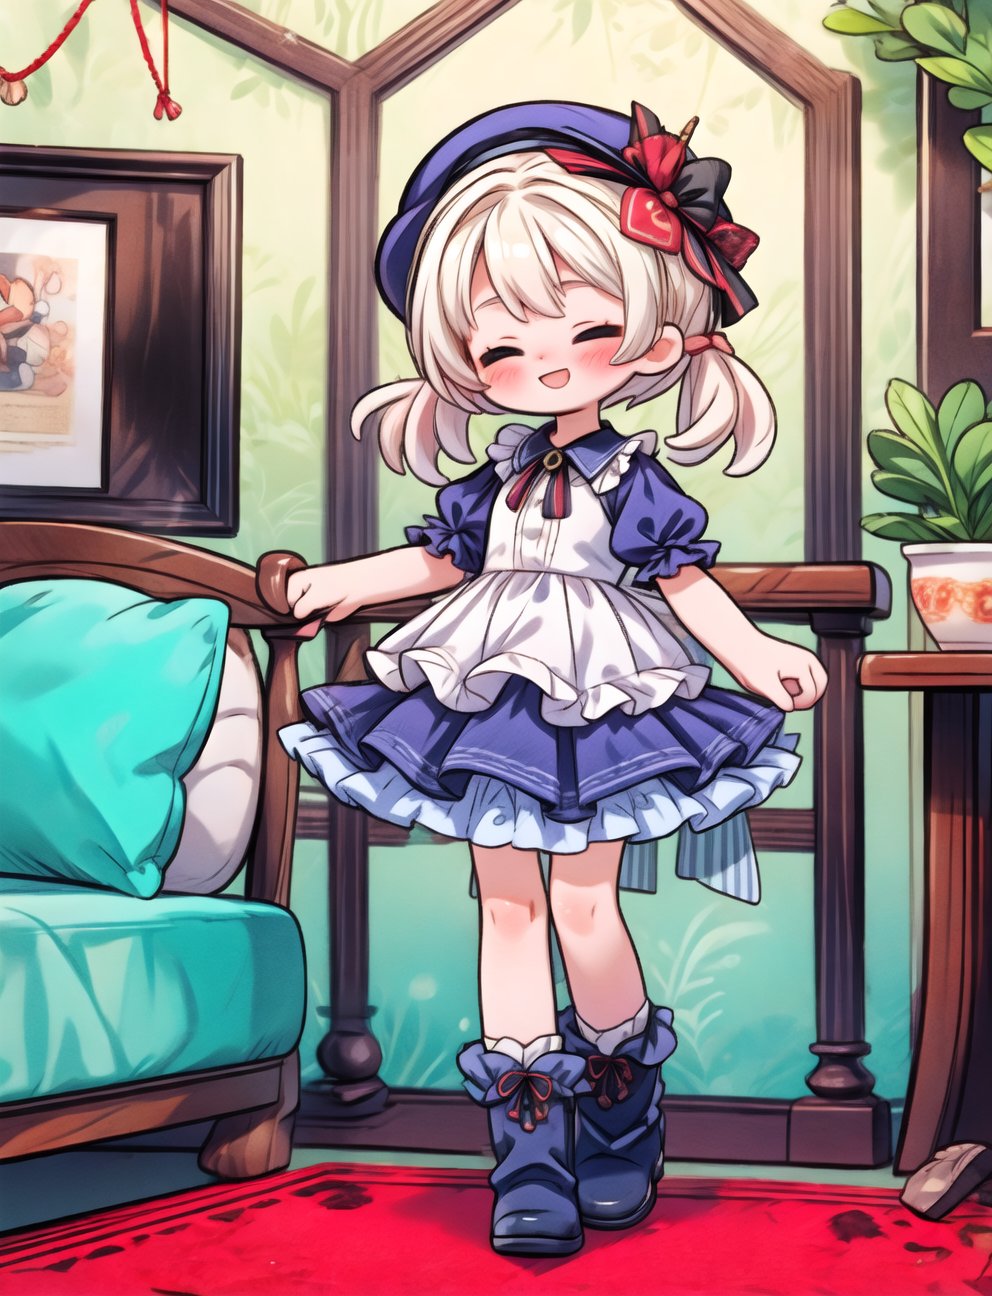 score_9, score_8_up, score_7_up, score_6_up, score_5_up, score_4_up, BREAK, source_anime,
room, indoor, toon, ratong_safe

1 girl, dress, wearing cute dress, boots, ((frilled dress)), blush, nervous smile, open eyes, wearing green dress, beautiful, full body, hat, dinamic pose, long dress, black boots, (frilly skirt), striped socks